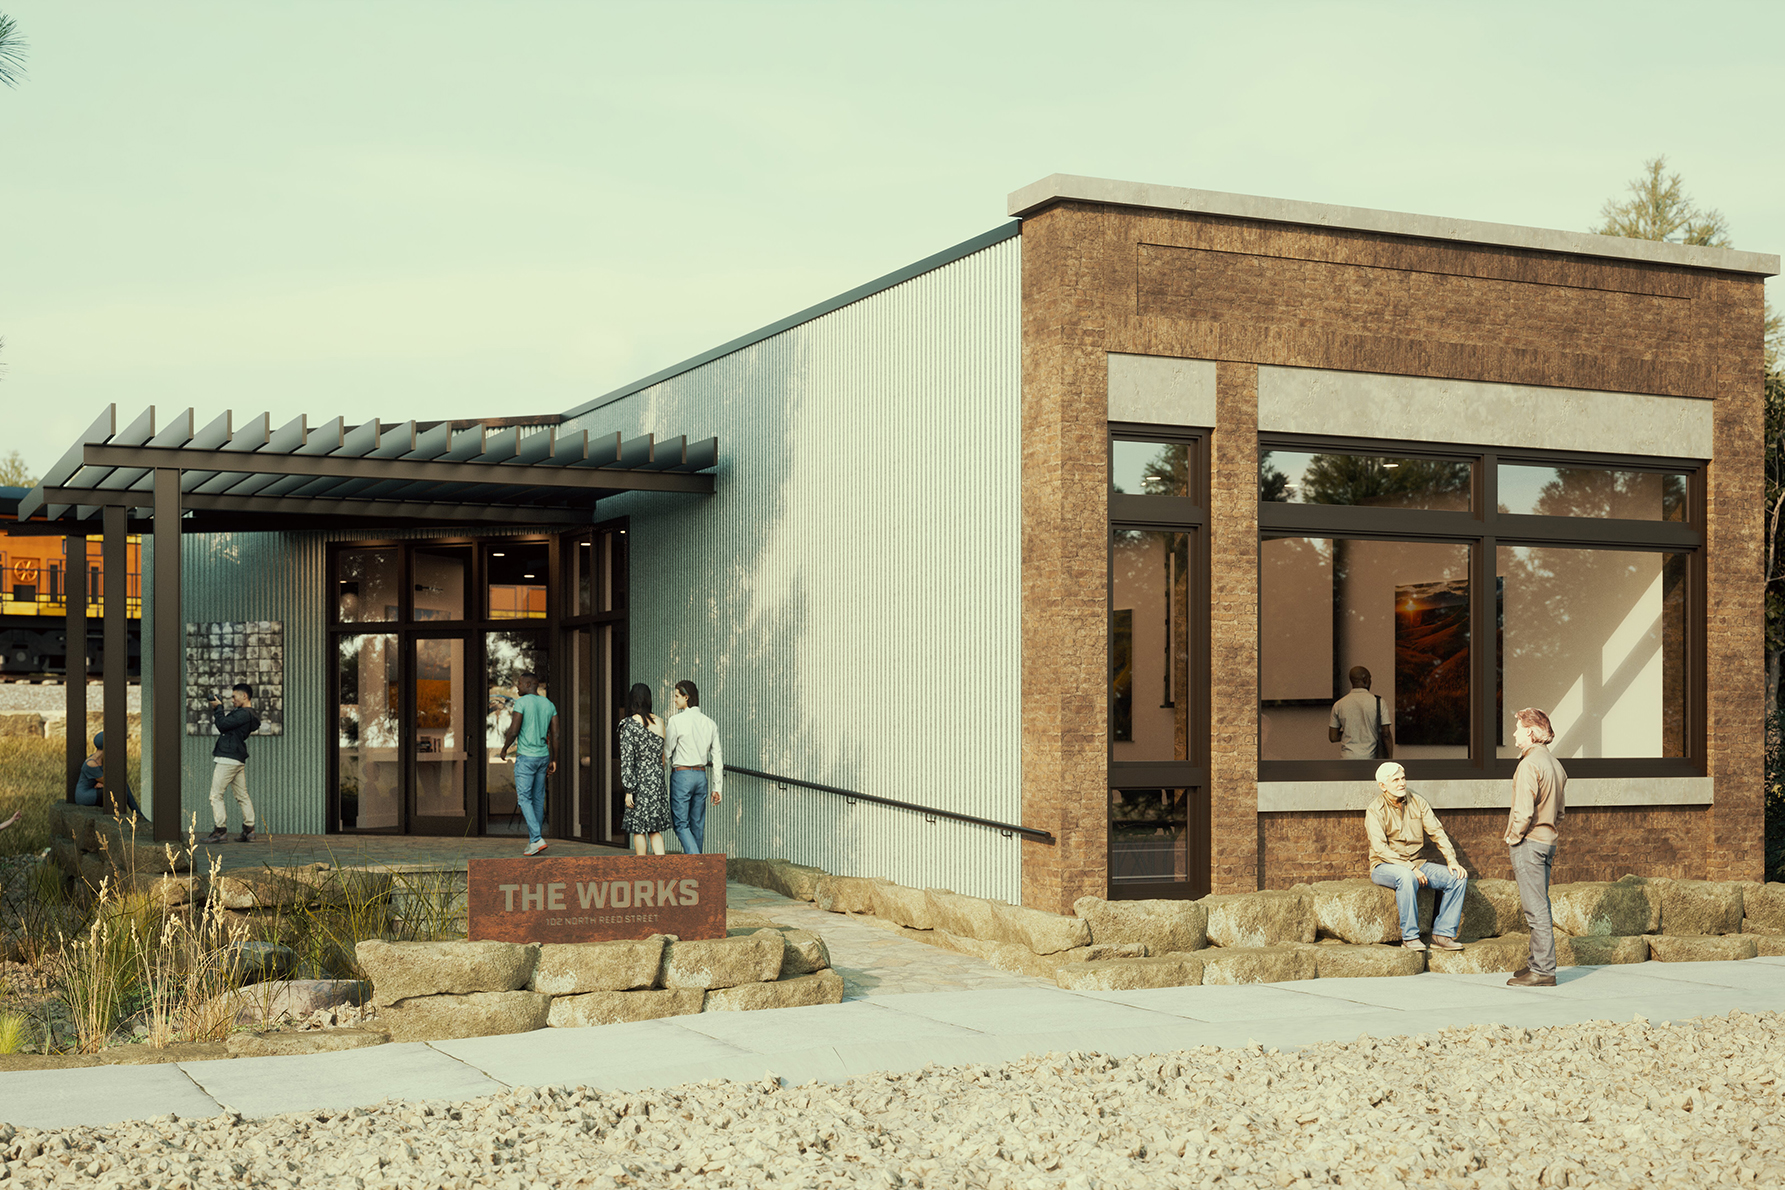 An architectural rendering of The Works, a historic renovated arts and culture building, in Matfield Green, KS.